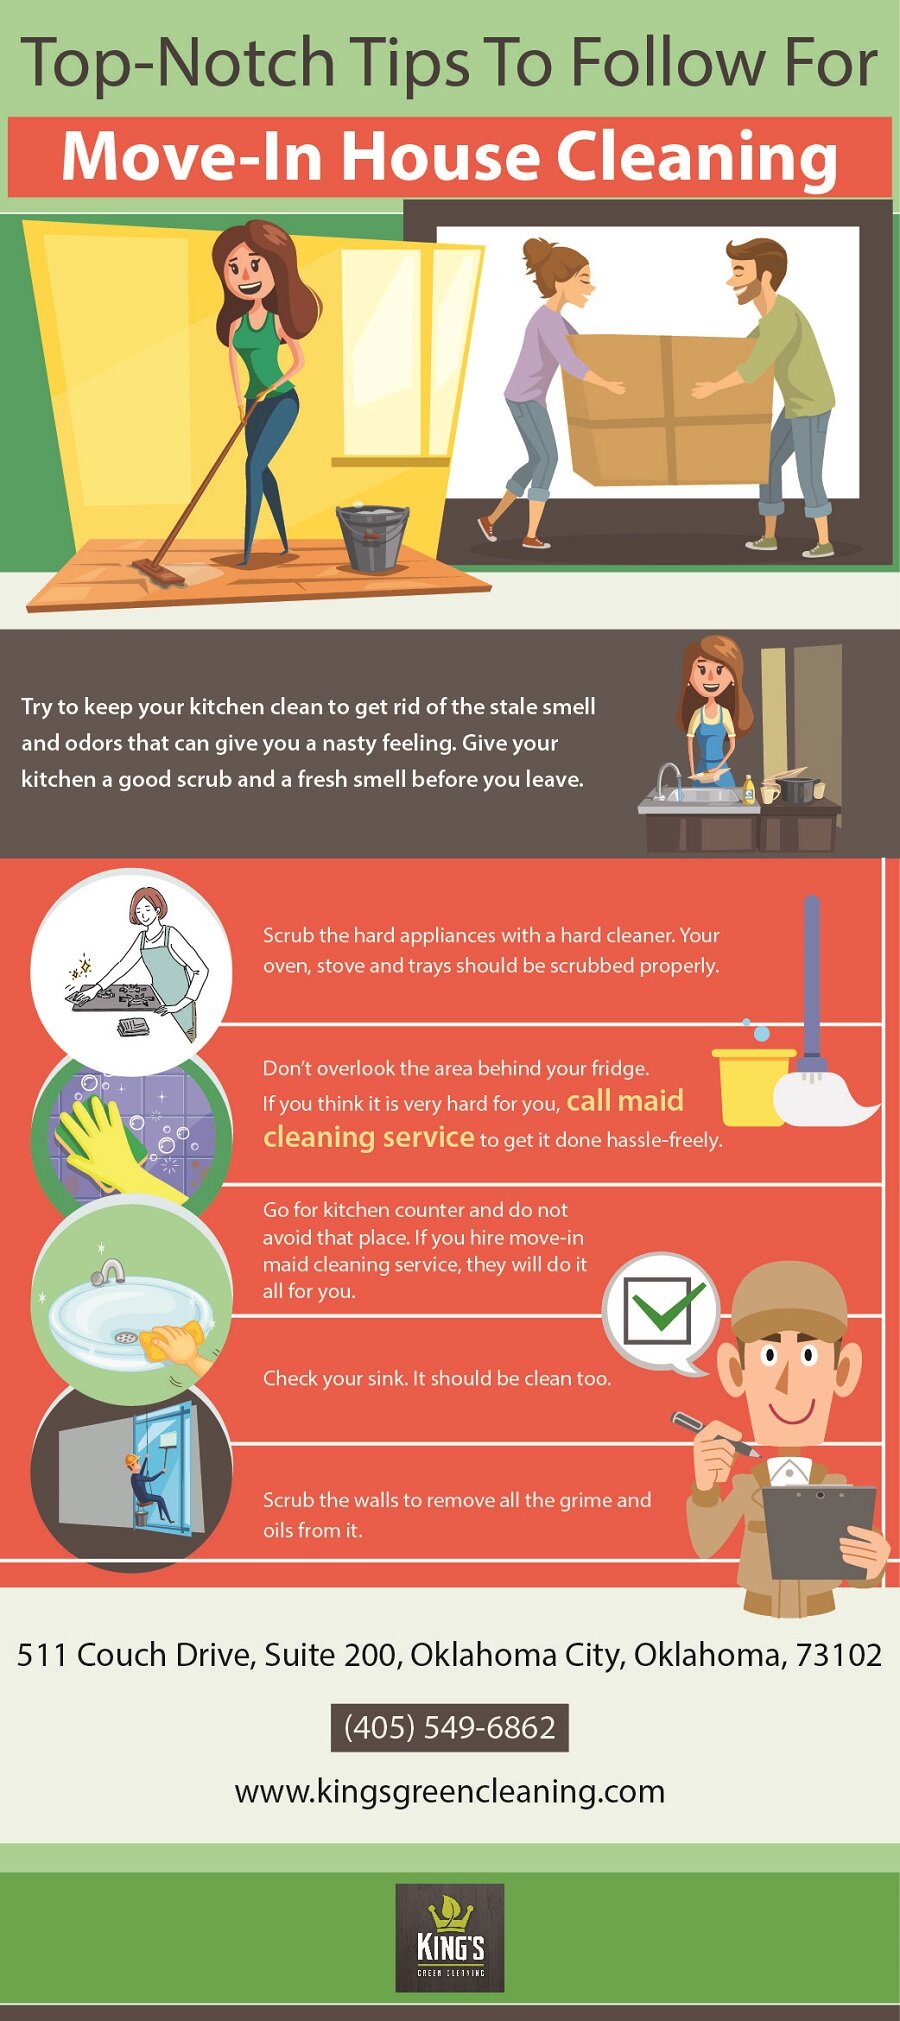 Tips For Cleaning Appliances Of All Types